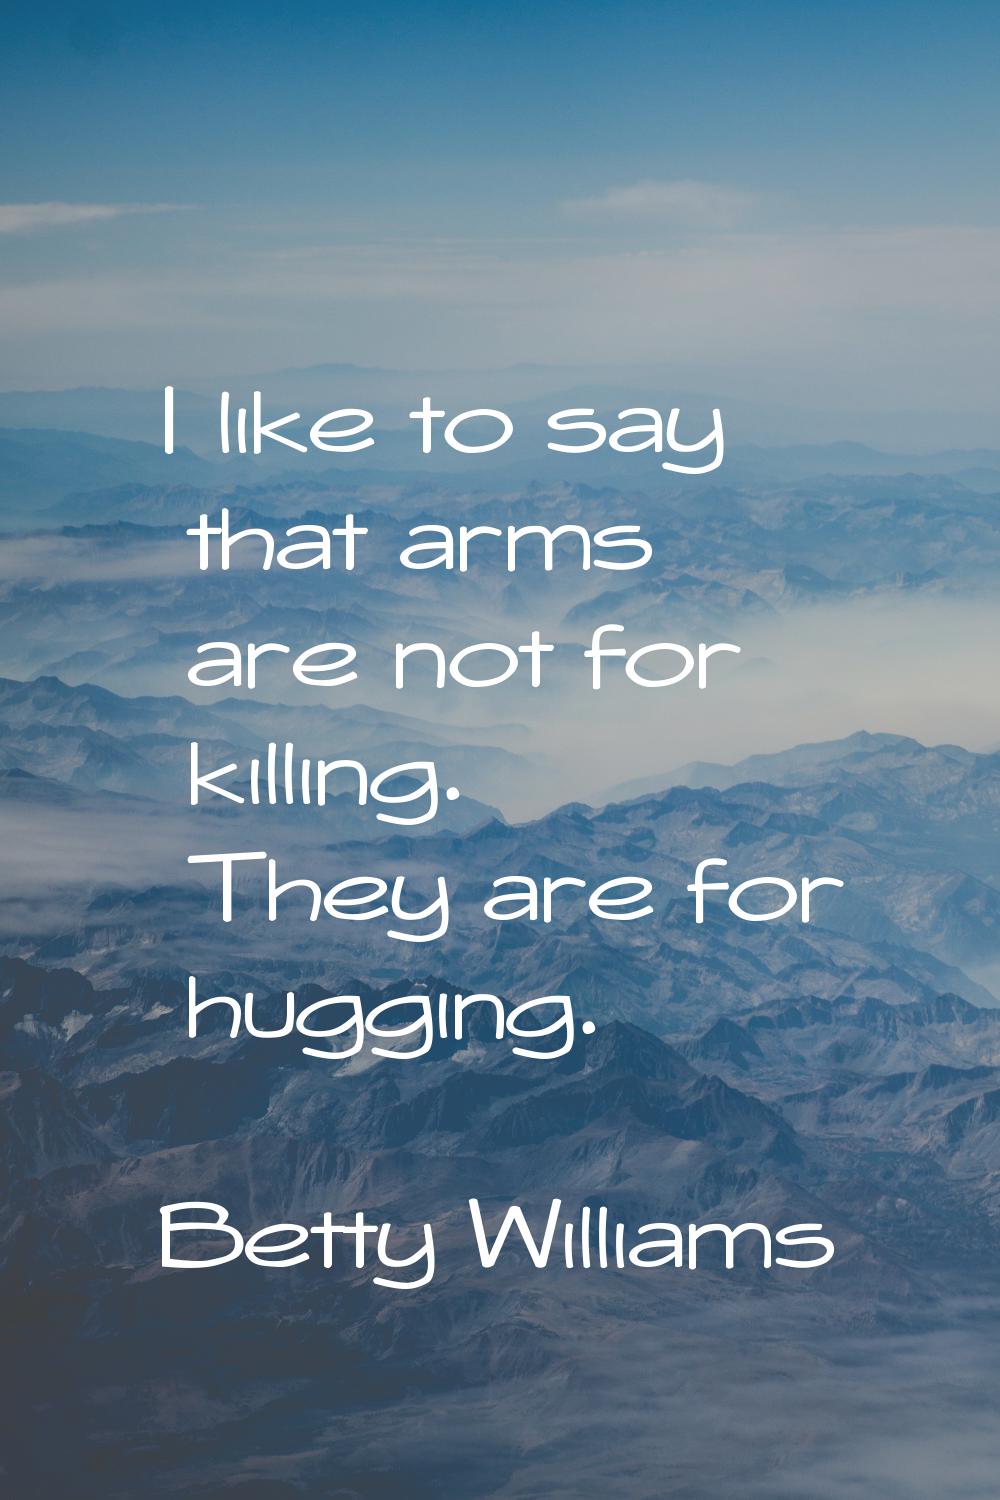 I like to say that arms are not for killing. They are for hugging.